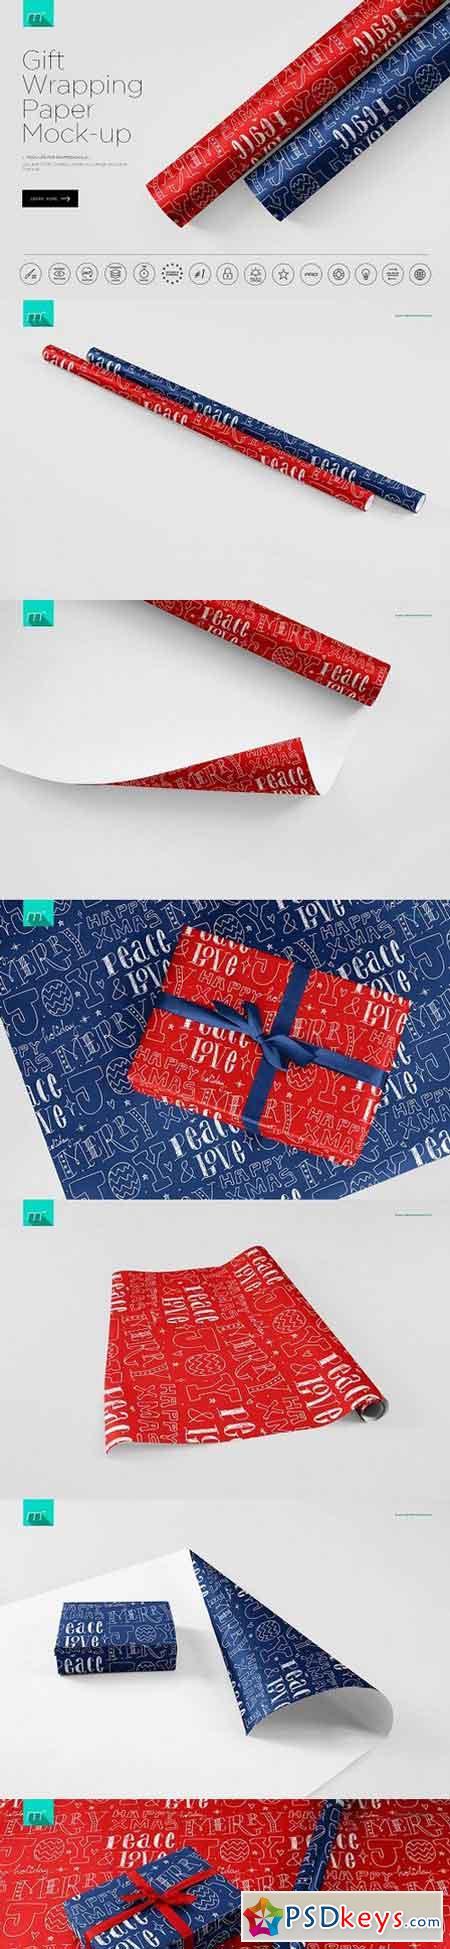 Gift Wrapping Paper Mock-up 1100717